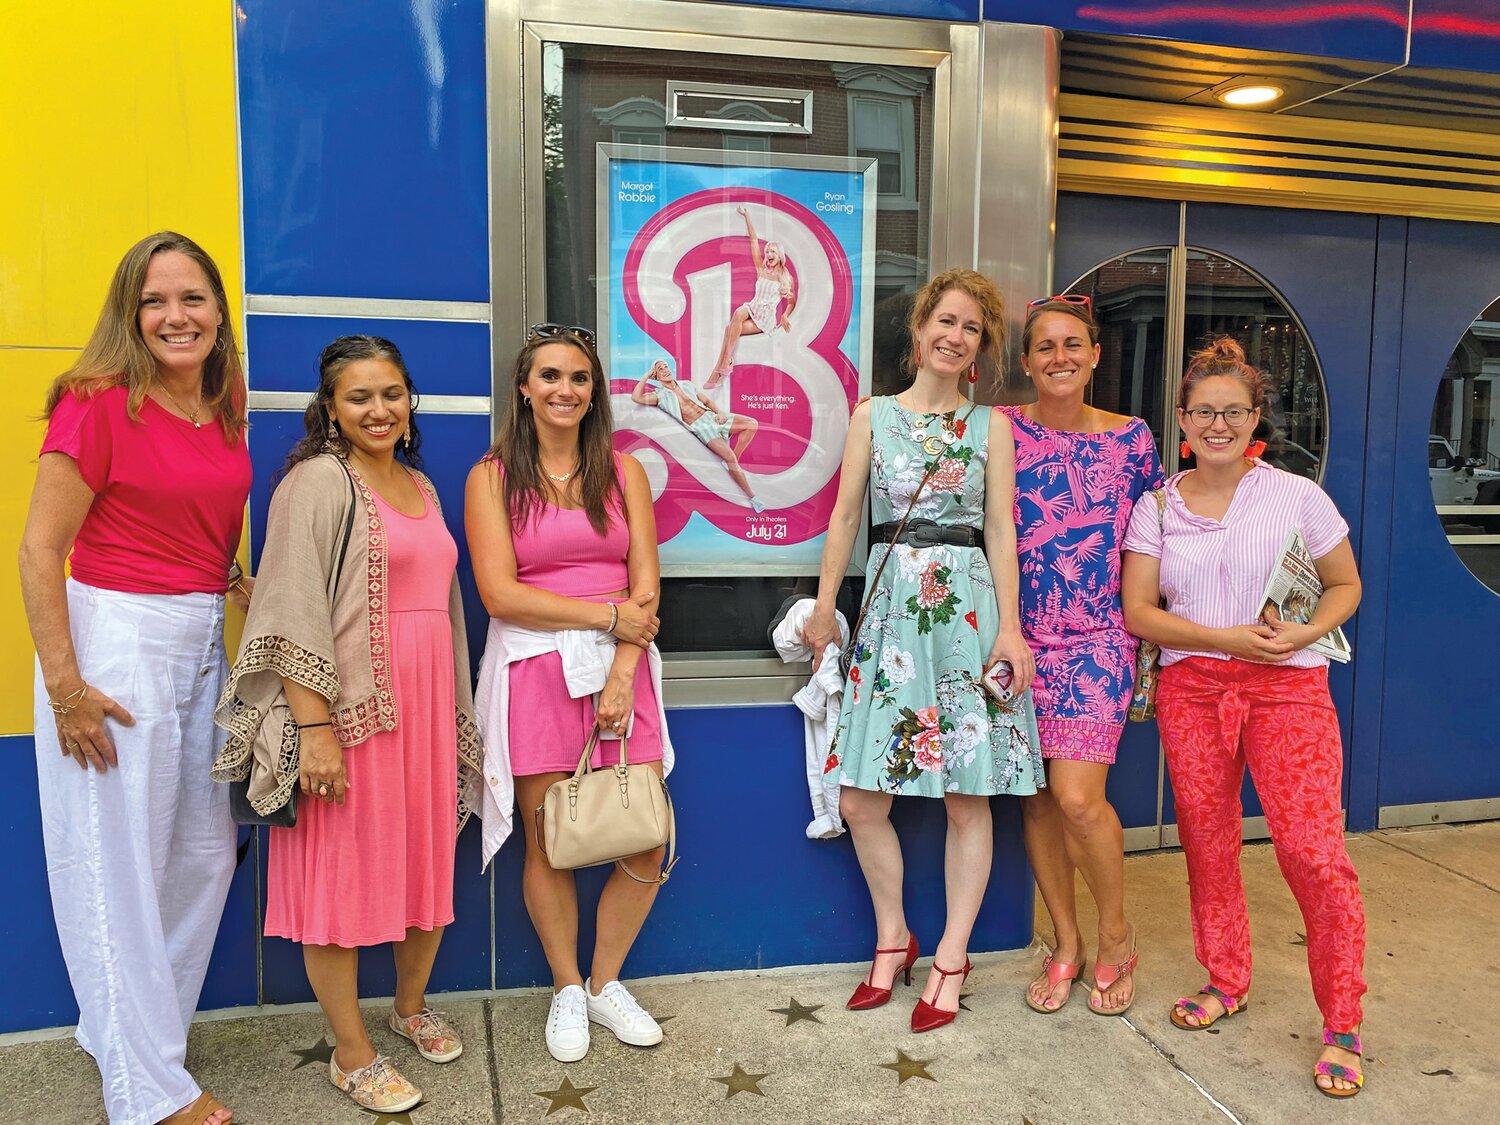 Girls of all ages head to the County Theater to watch “Barbie.”